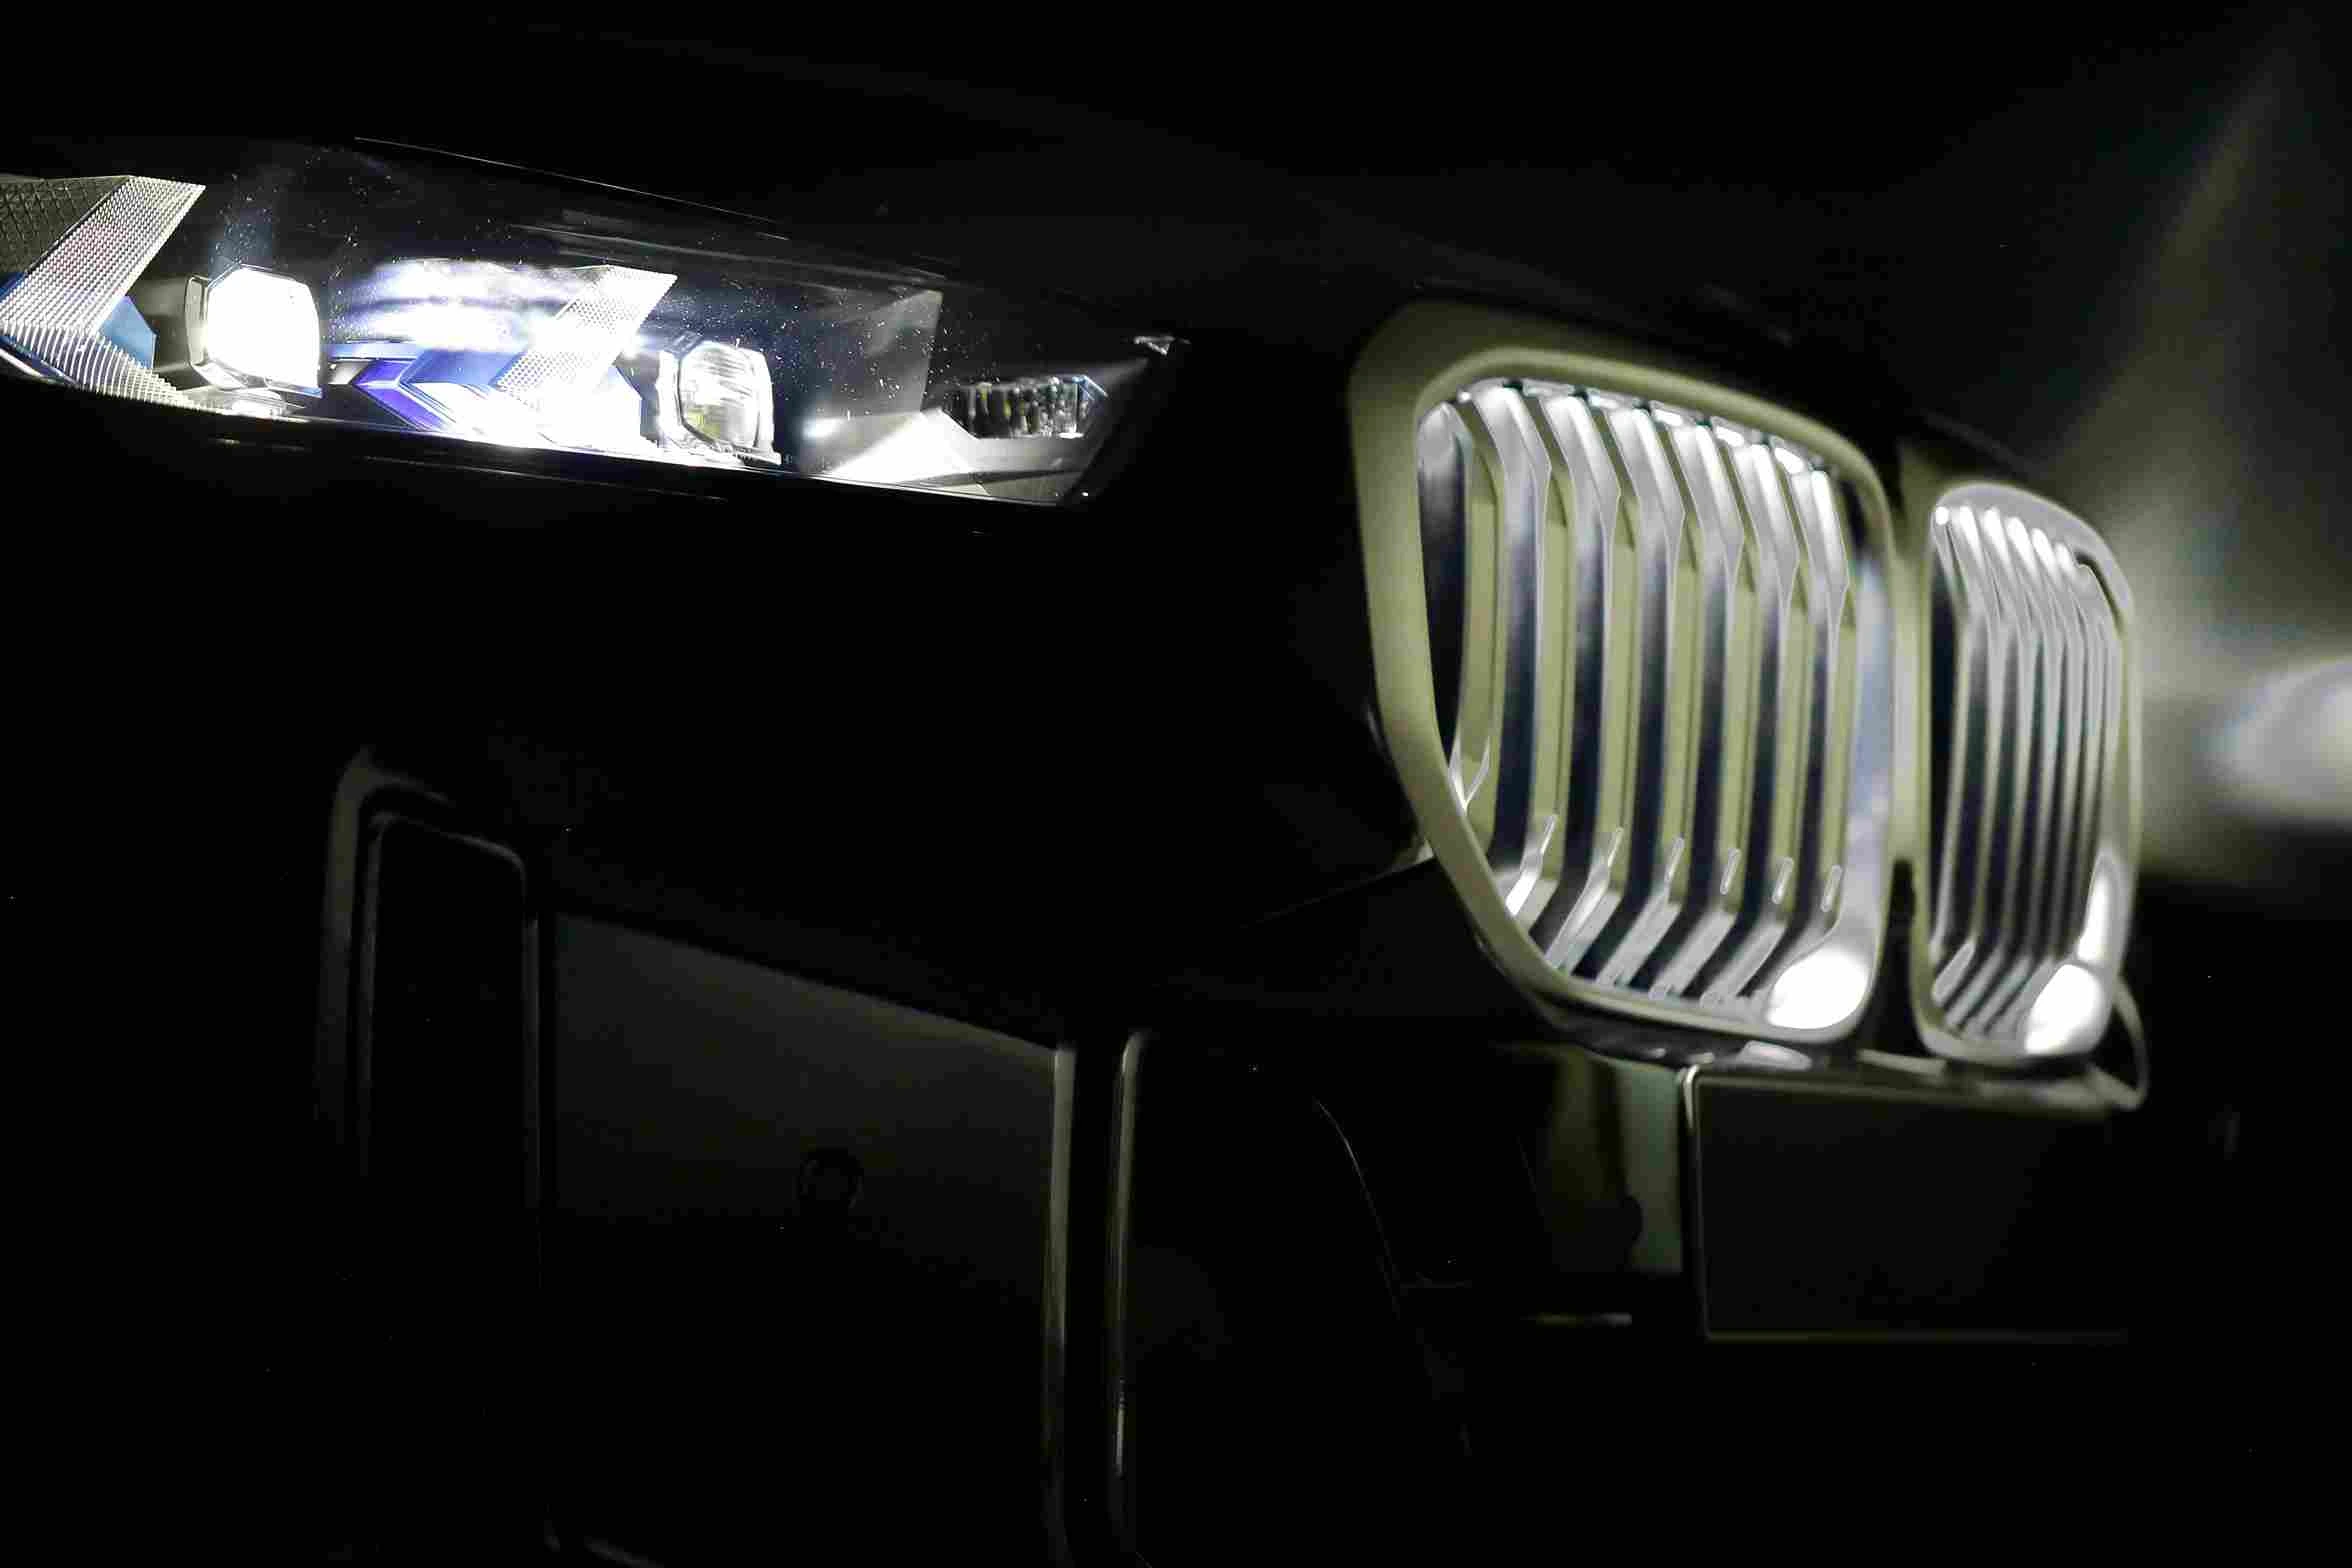 BMW Kidney Grille ‘Iconic Glow’ (Waterfall Effect).